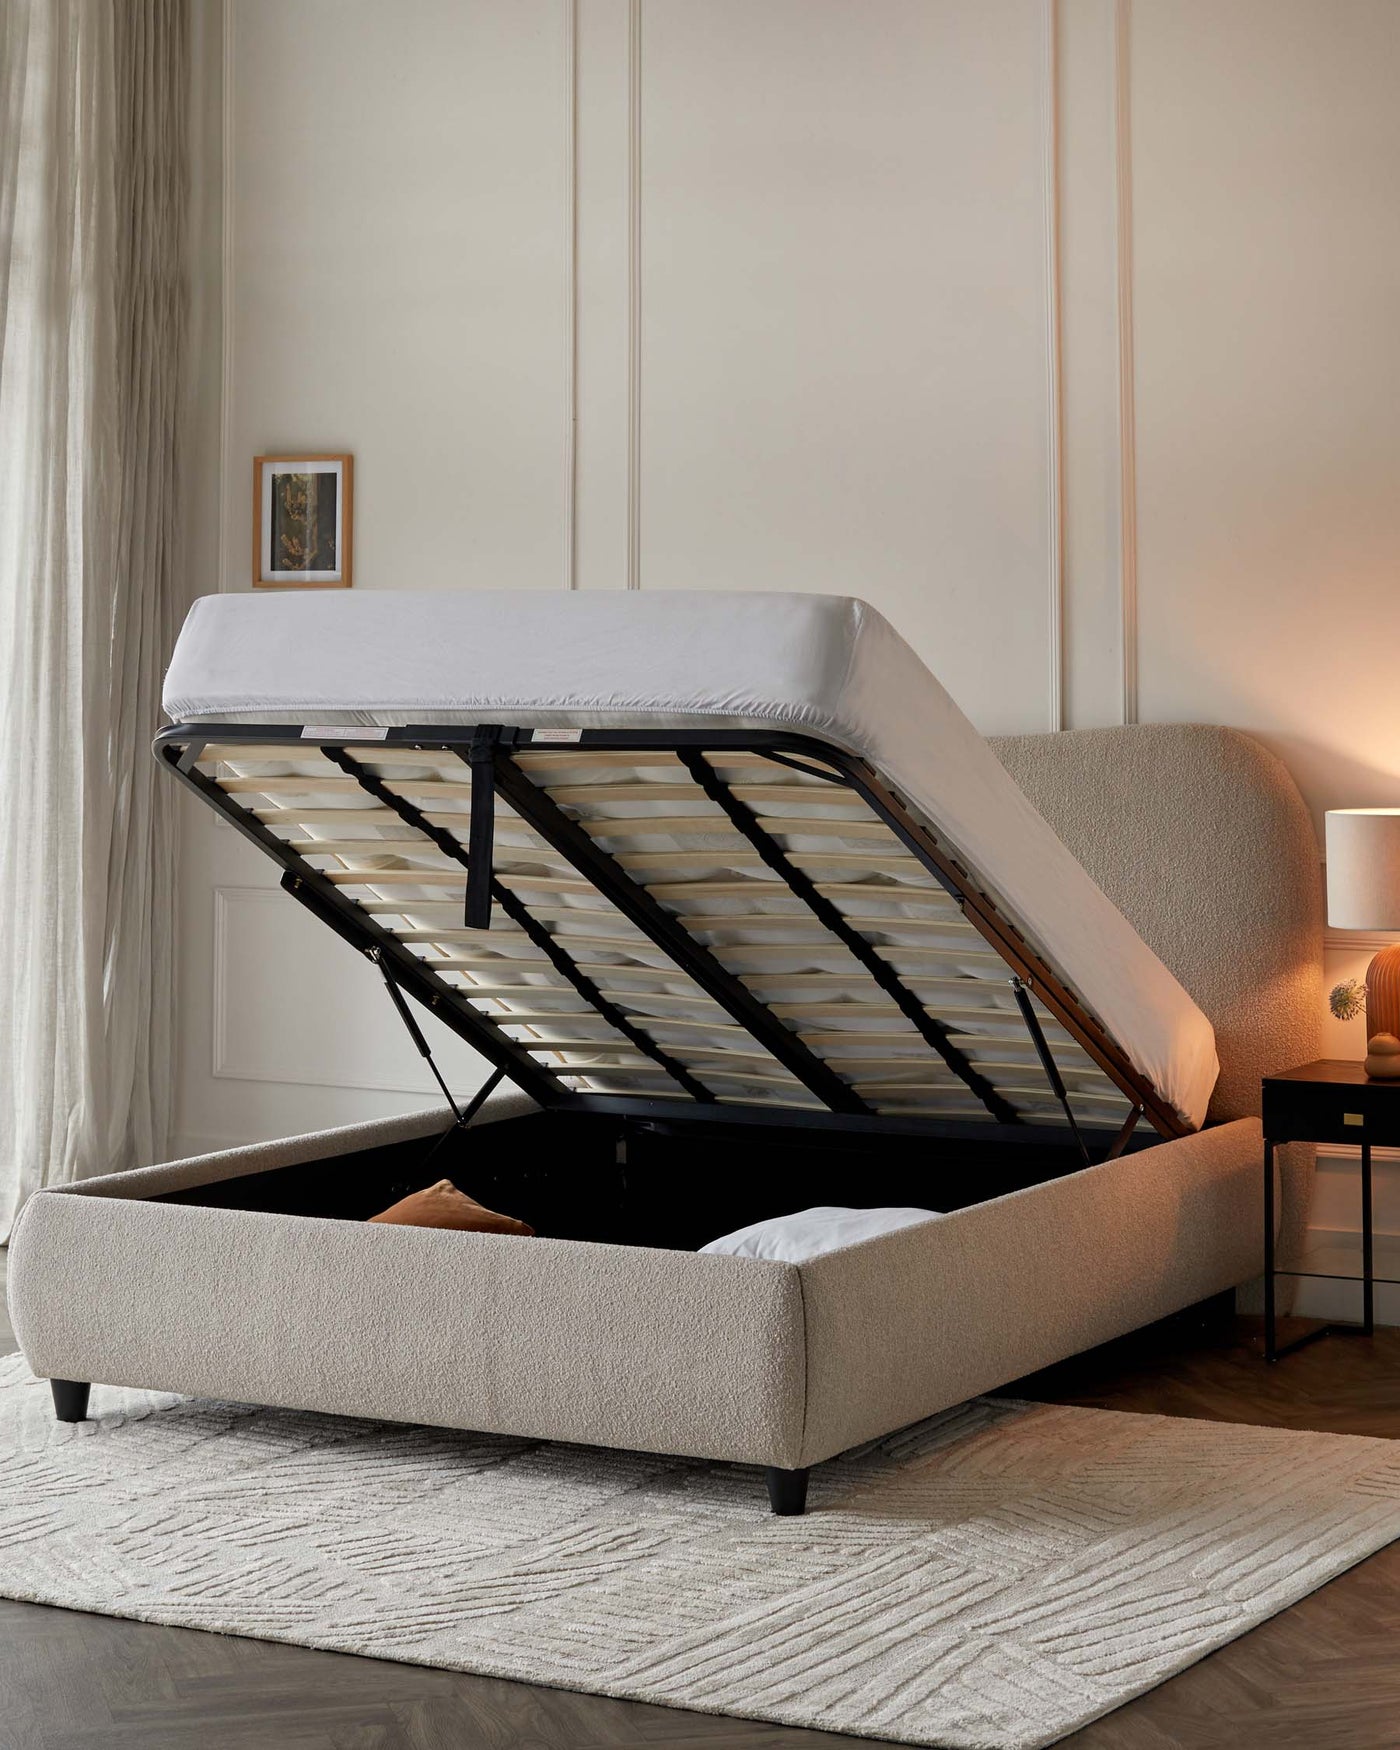 Upholstered storage bed with hydraulic lift system, featuring a beige fabric frame on black legs, a lifted mattress revealing an open storage space, set on a textured area rug, accented by a warm-glow table lamp and beside table.